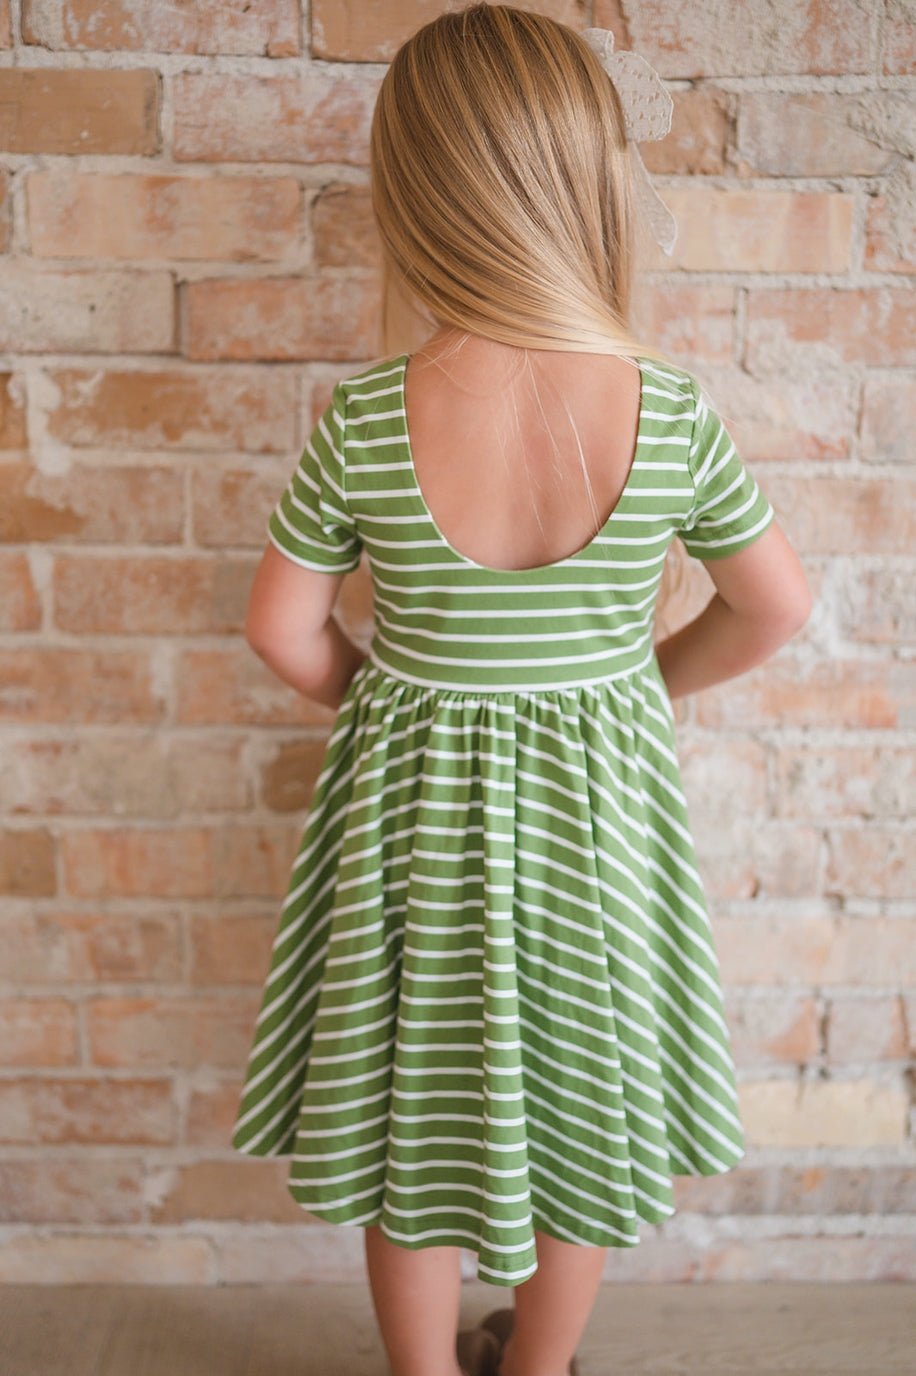 Girls Classic Twirl Dress in Asparagus Stripe - Blissfully Lavender BoutiqueOllie Jay